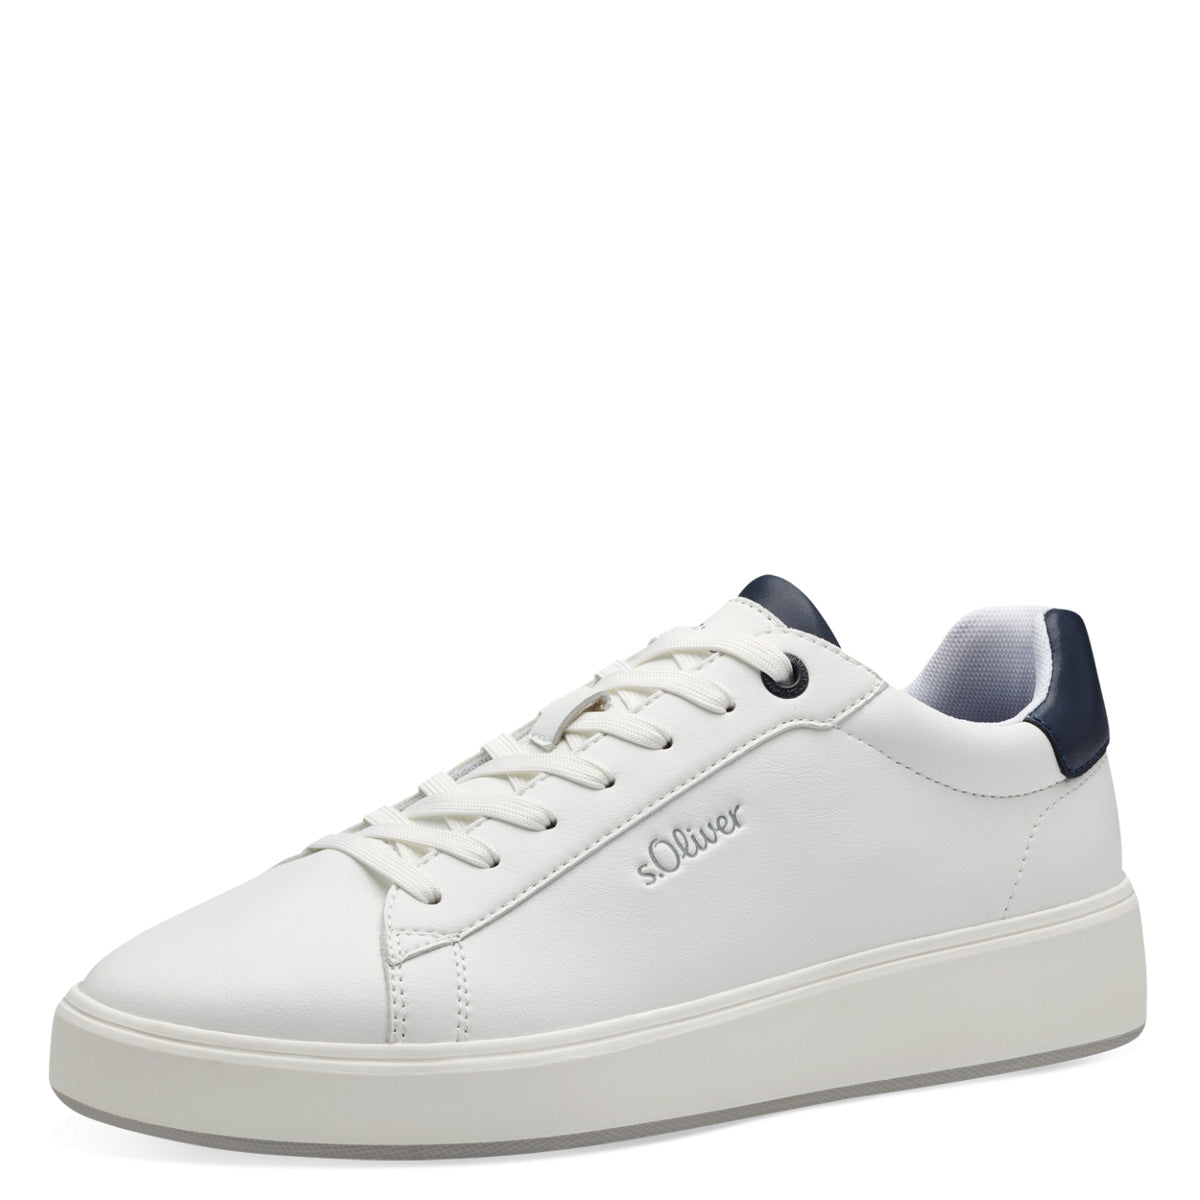 S.Oliver Men's White Trainer with Navy Detail